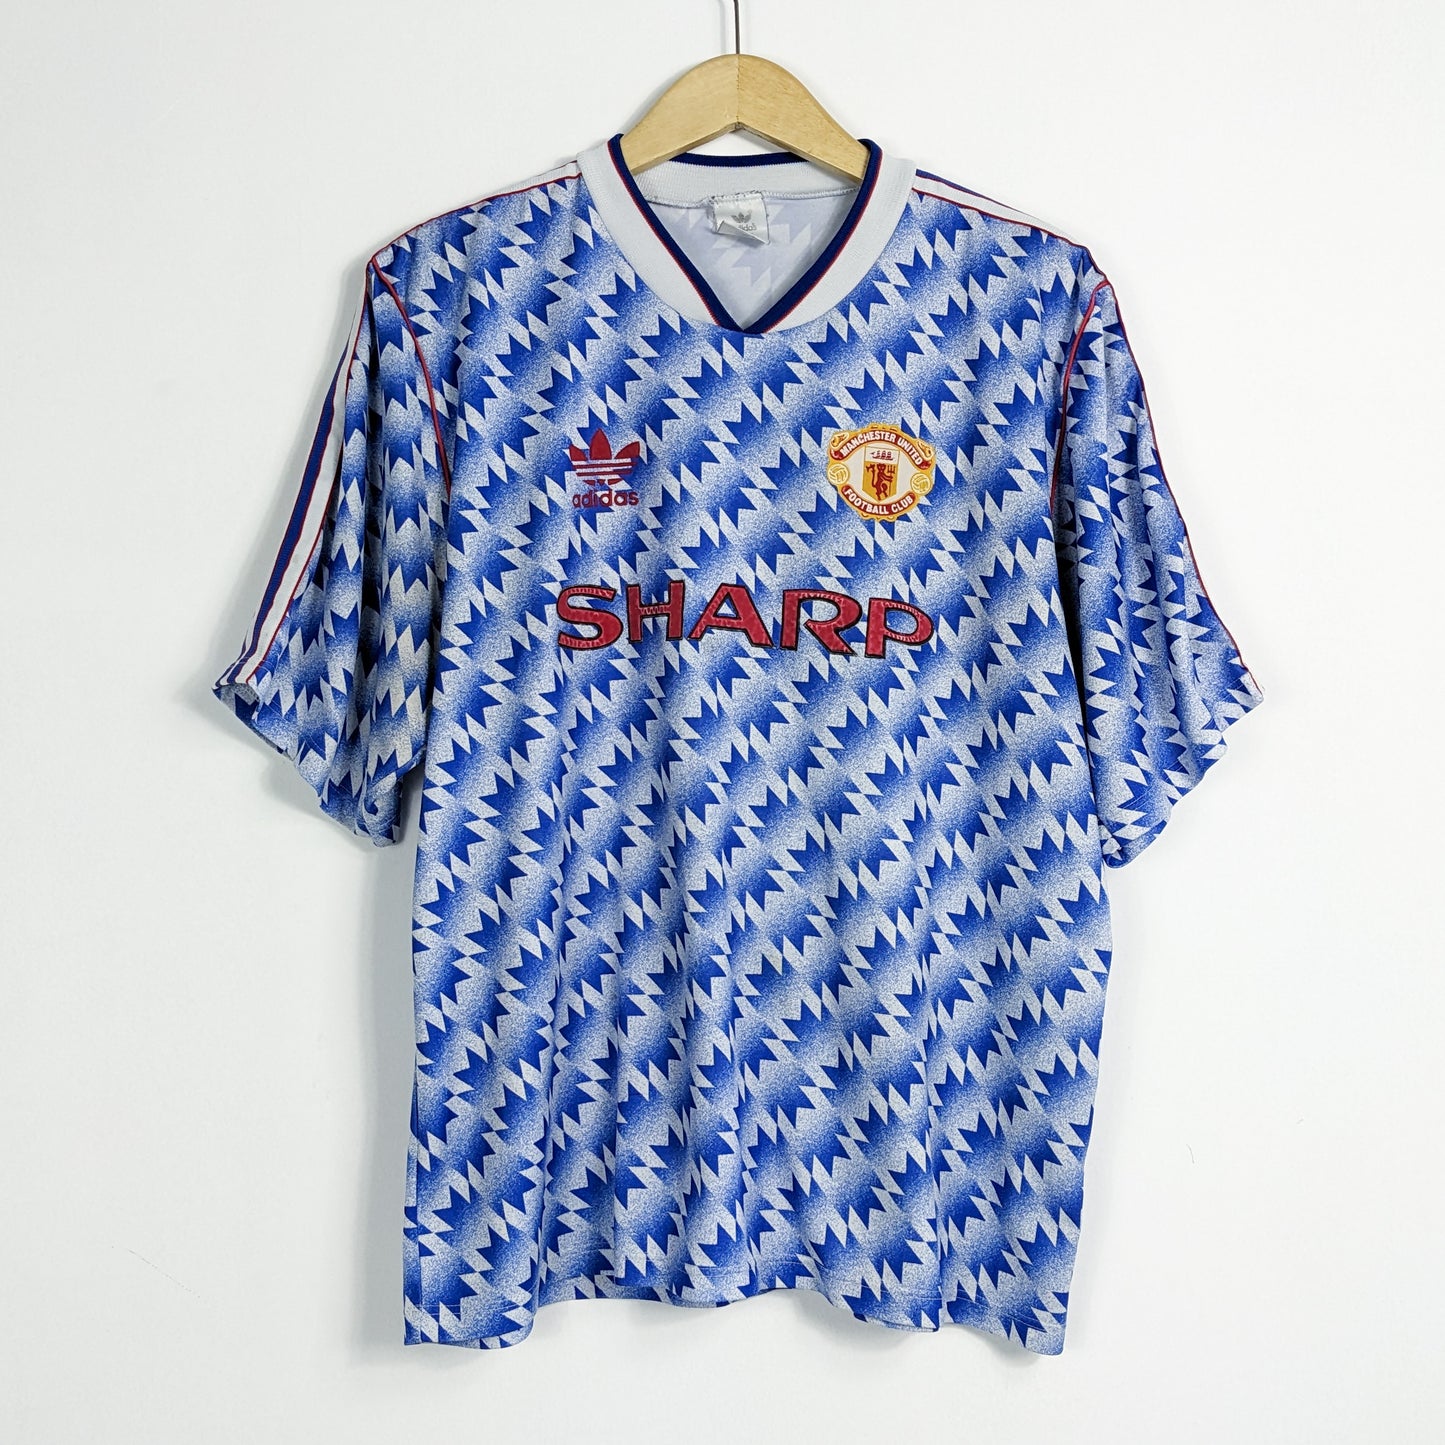 Authentic Manchester United 1990/1992 Away - Size M fit L